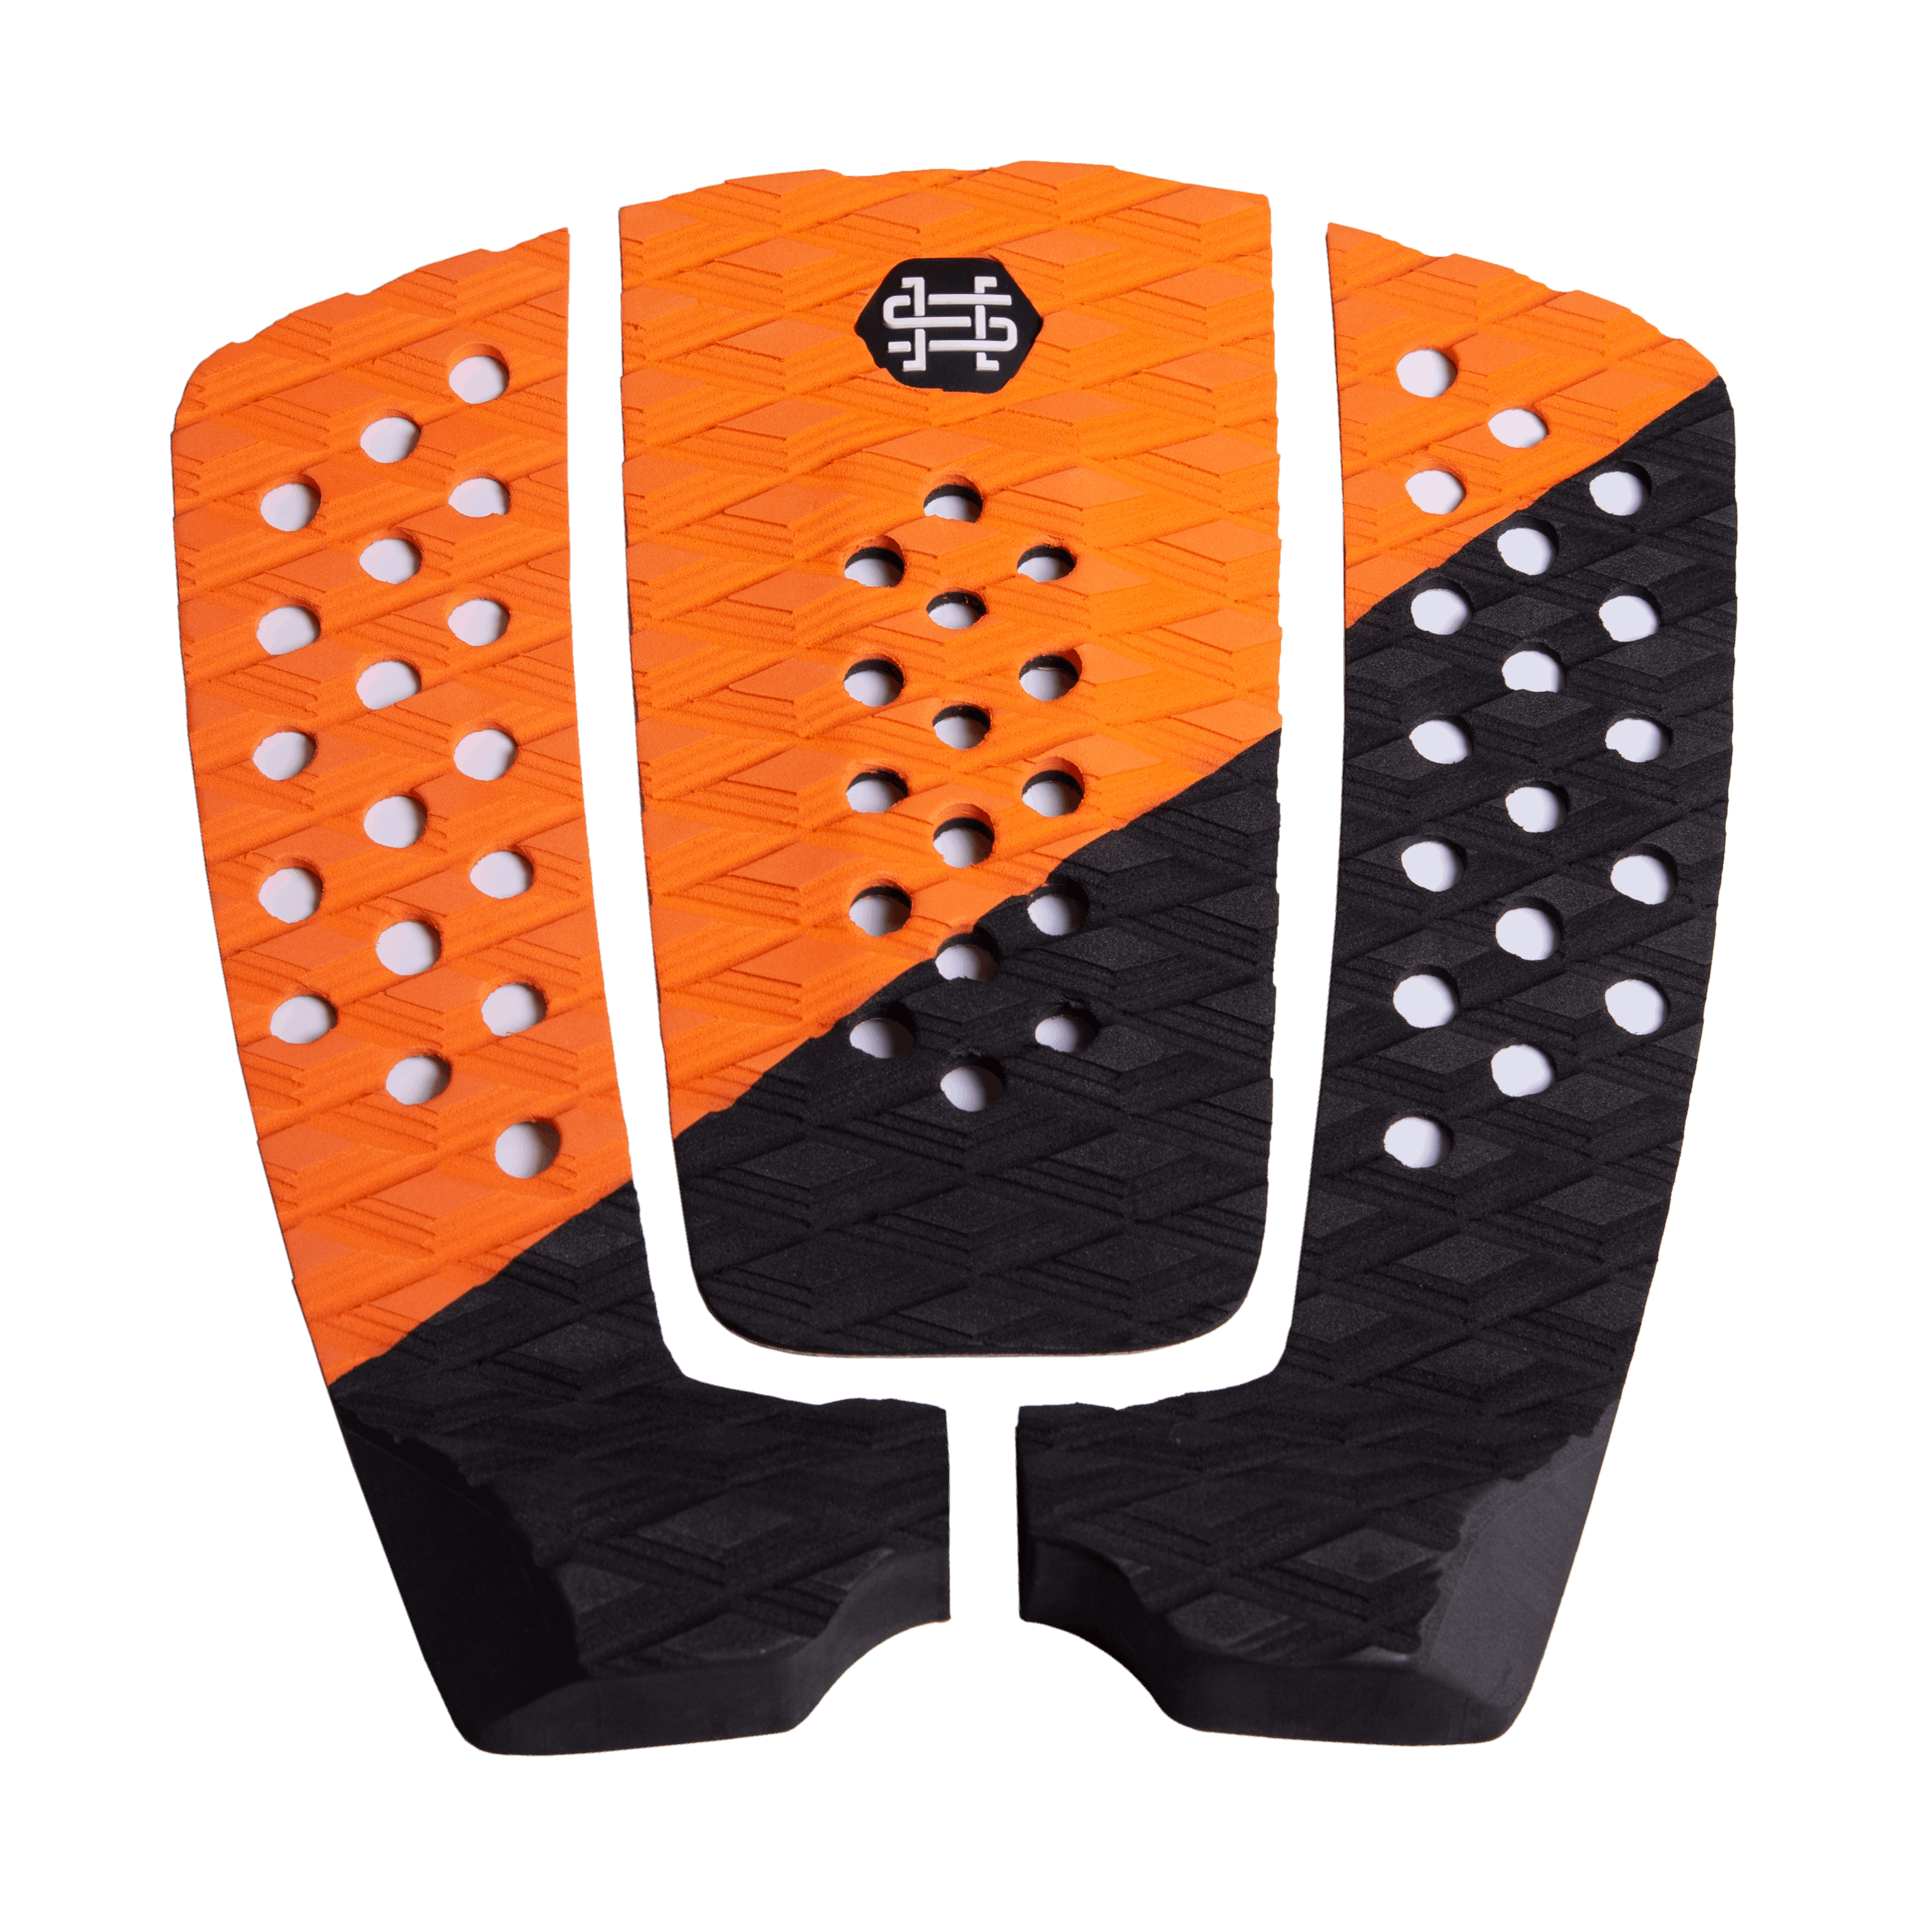 A pair of HL Diamond Rear Traction Pads with a premium traction Diamond pattern on a black background, made by Hyperlite.